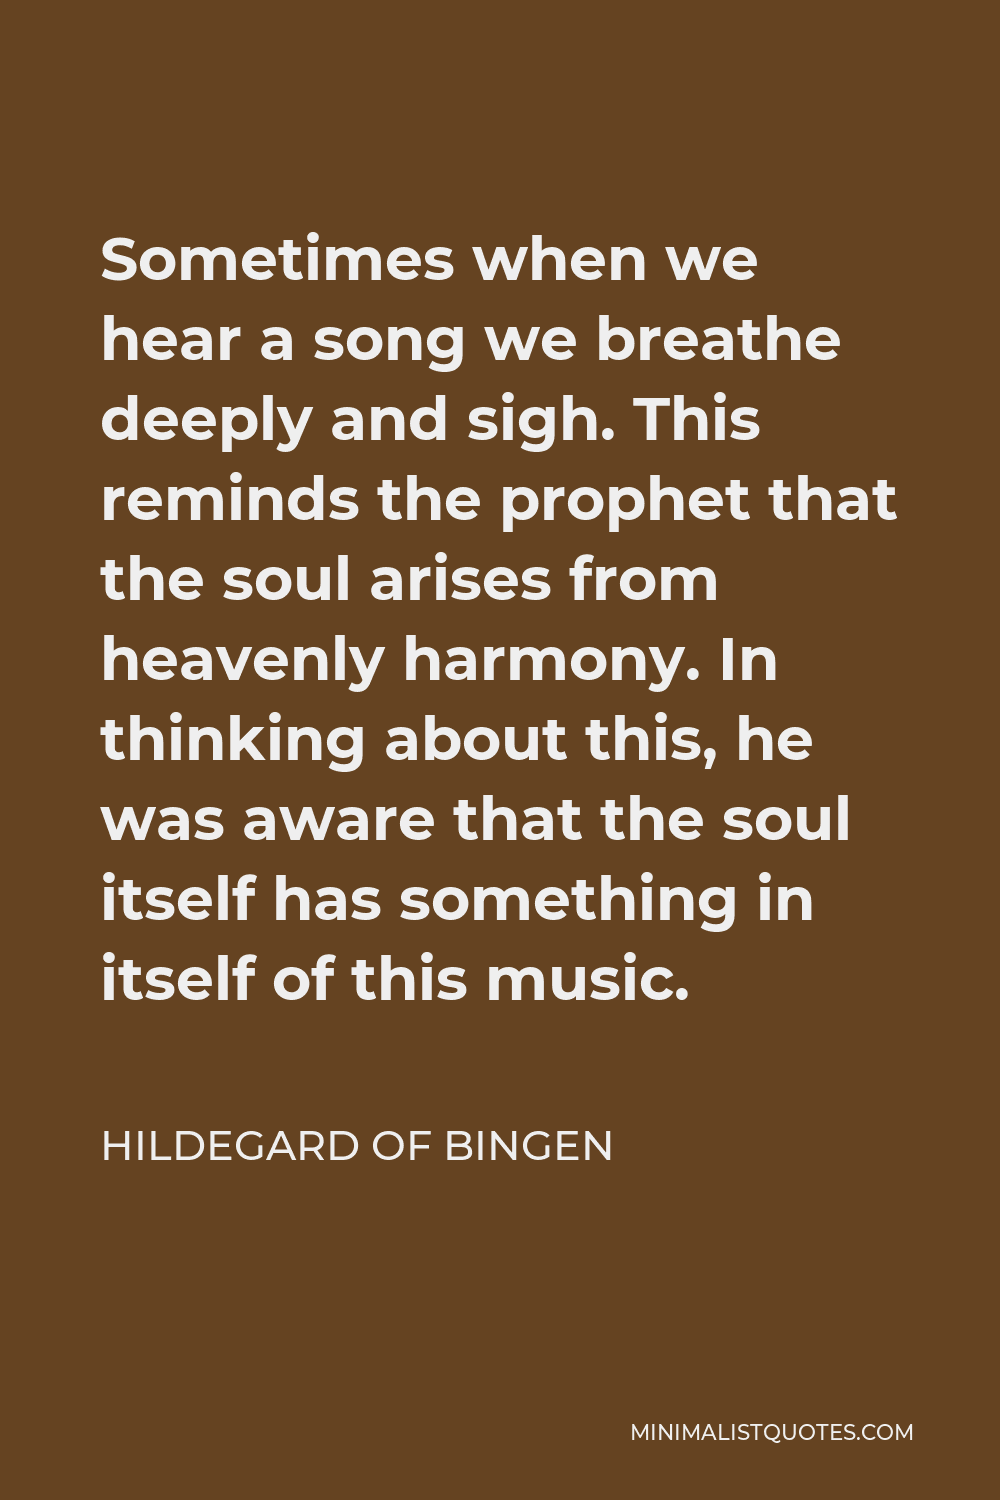 Hildegard of Bingen Quote - Sometimes when we hear a song we breathe deeply and sigh. This reminds the prophet that the soul arises from heavenly harmony. In thinking about this, he was aware that the soul itself has something in itself of this music.